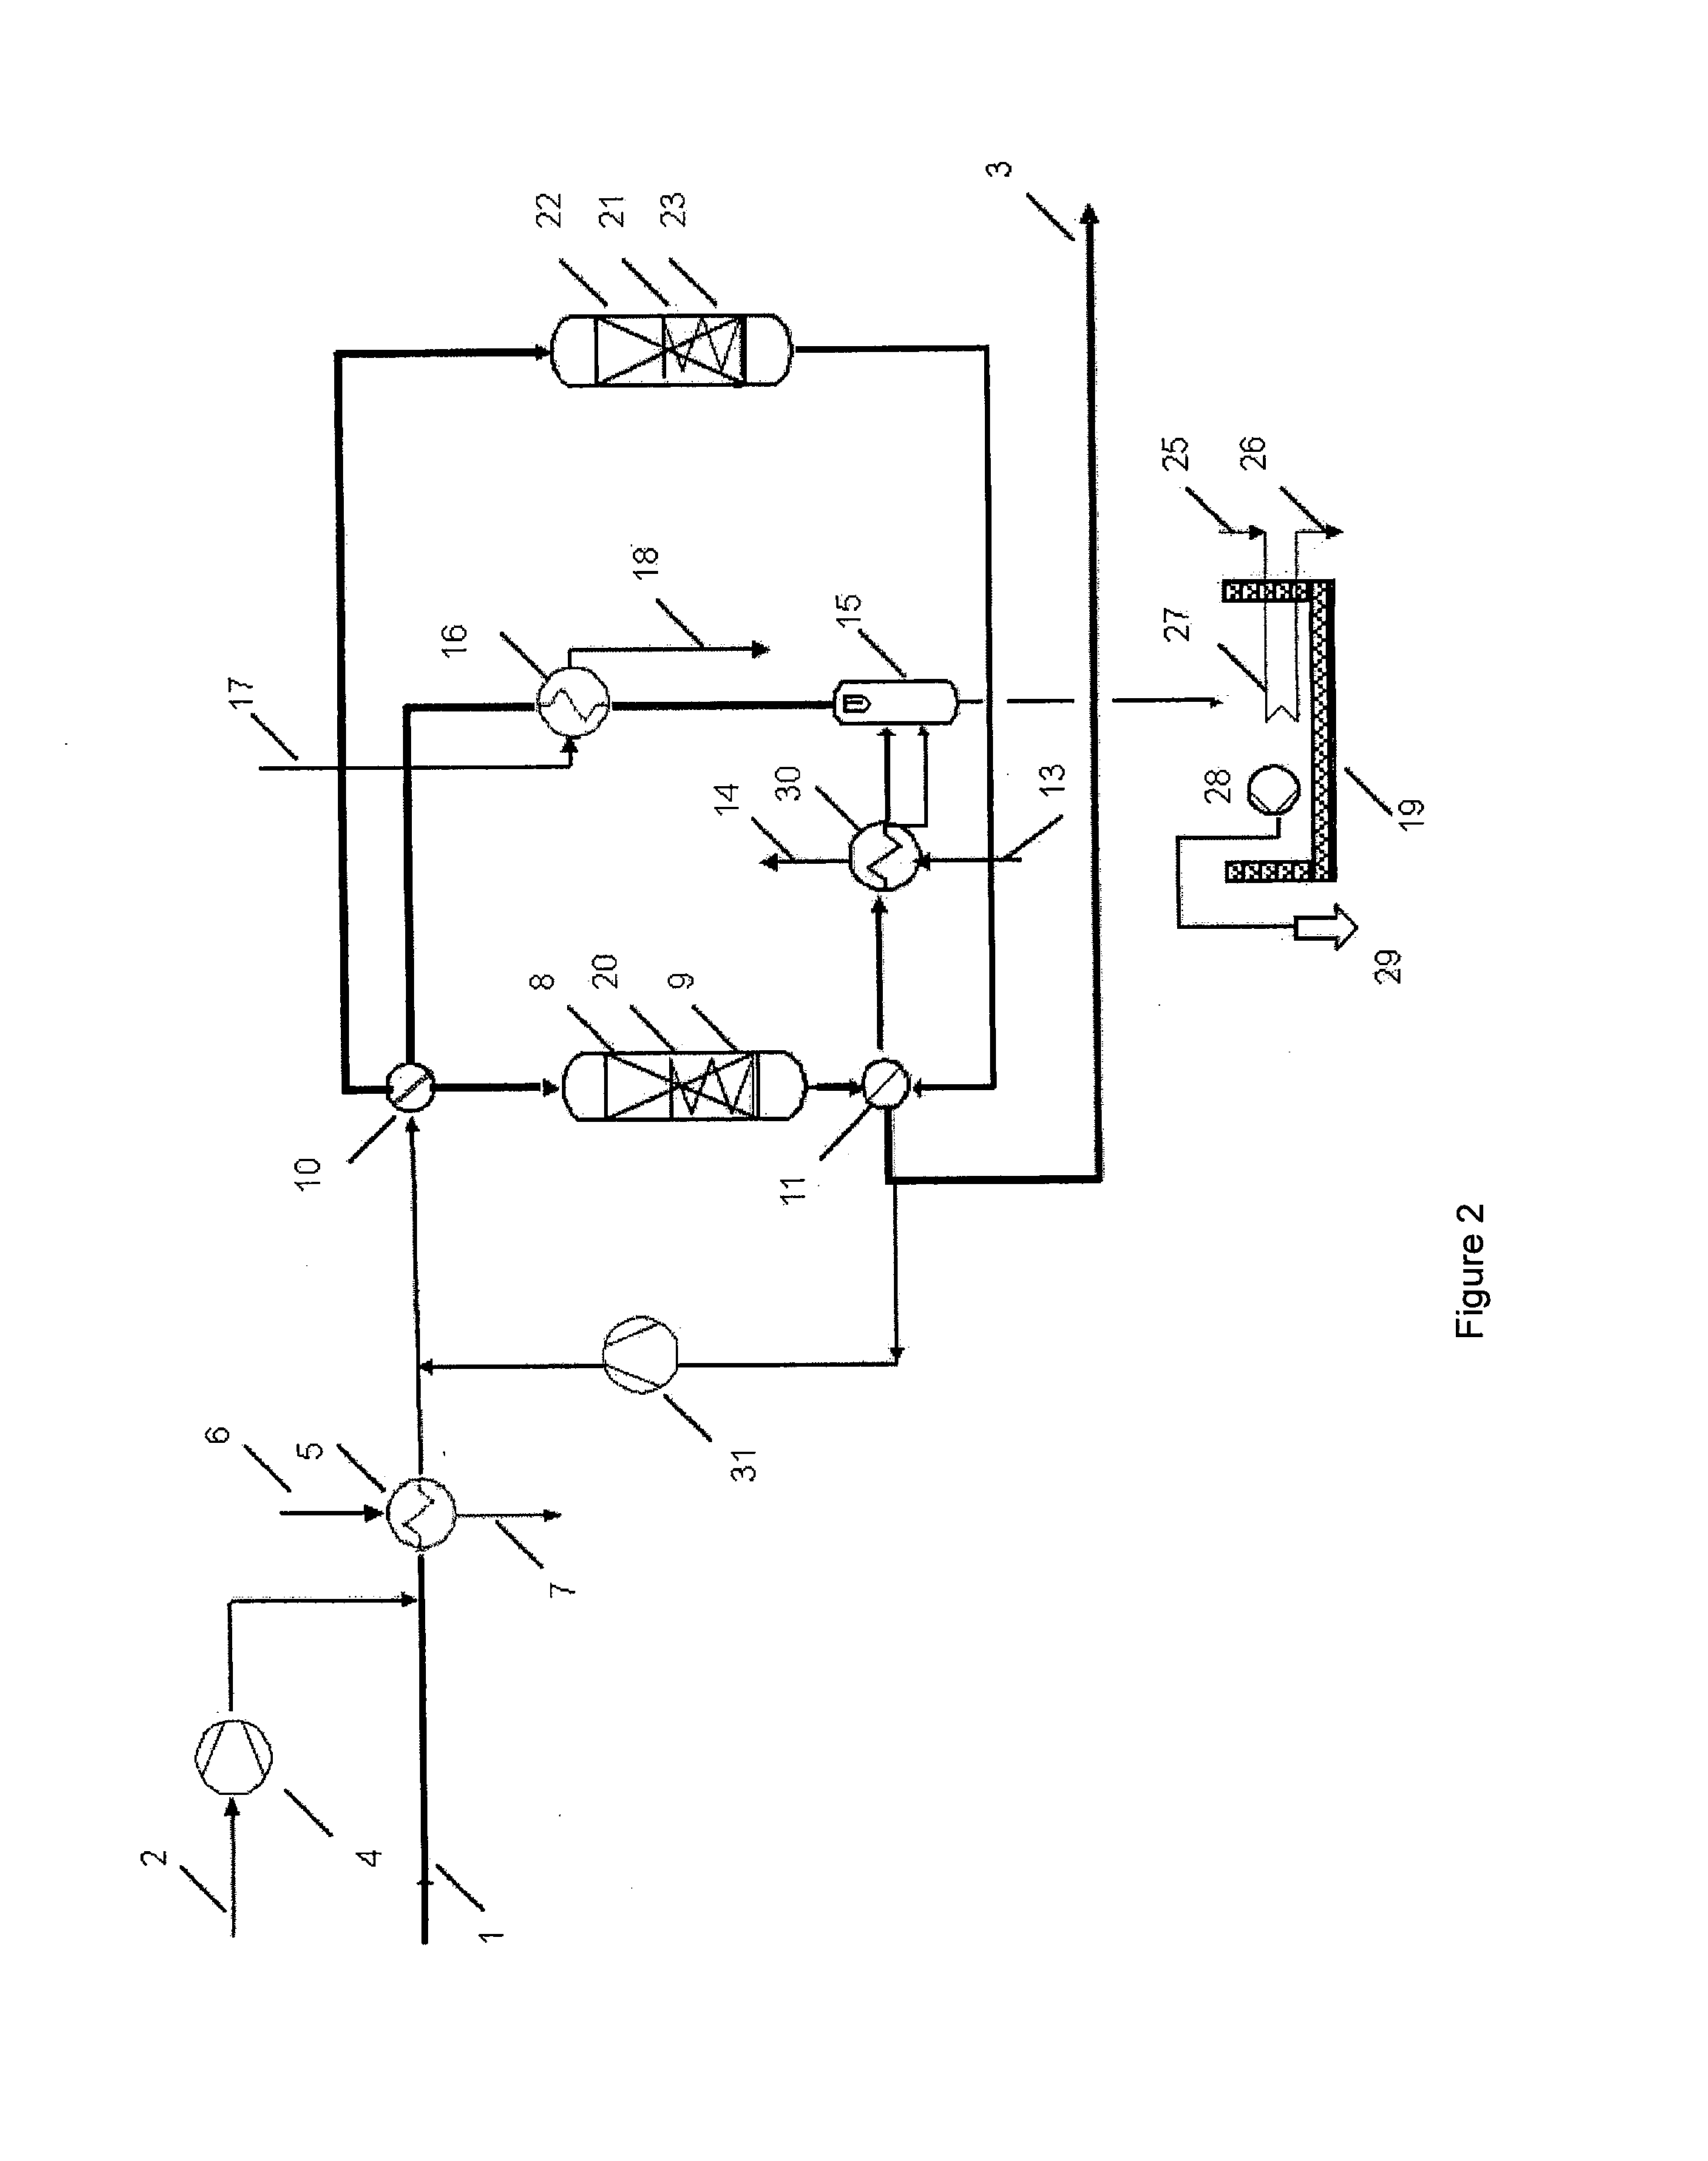 Process for the Removal of Hydrogen Sulfide from a Gas Stream